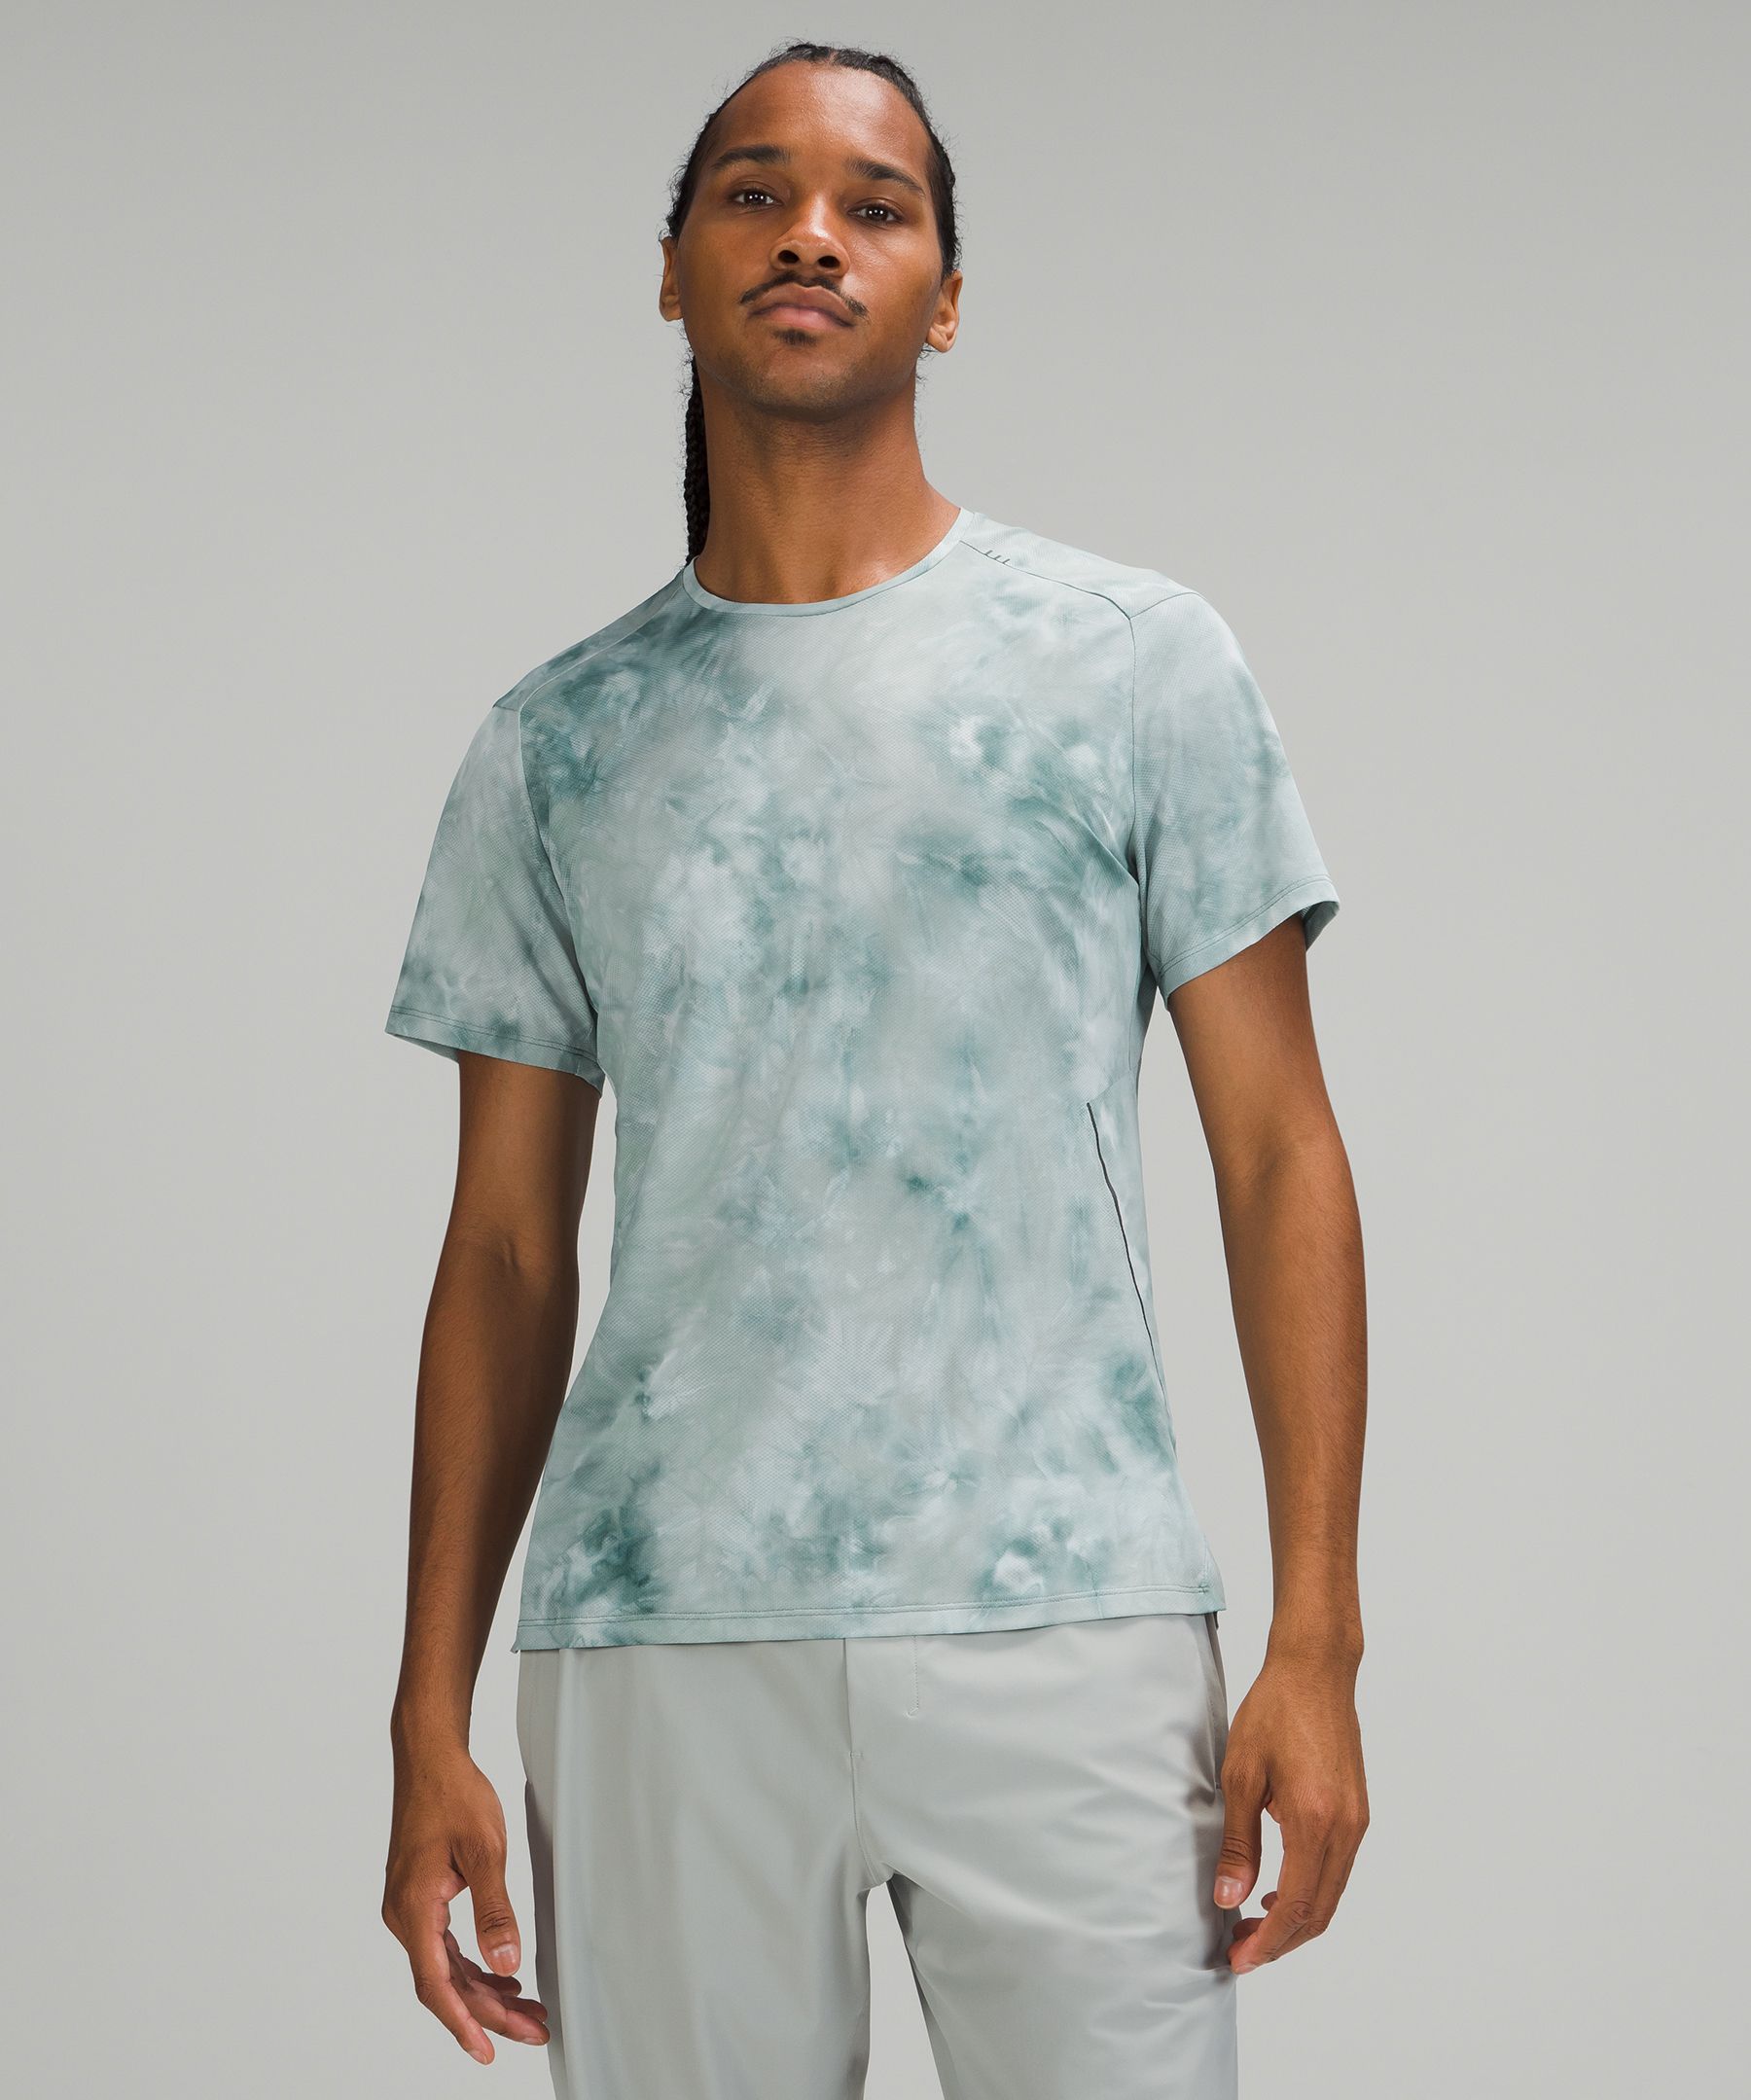 Lululemon Fast And Free Short Sleeve Shirt In Tidal Dye Wild Mint Tidewater Teal